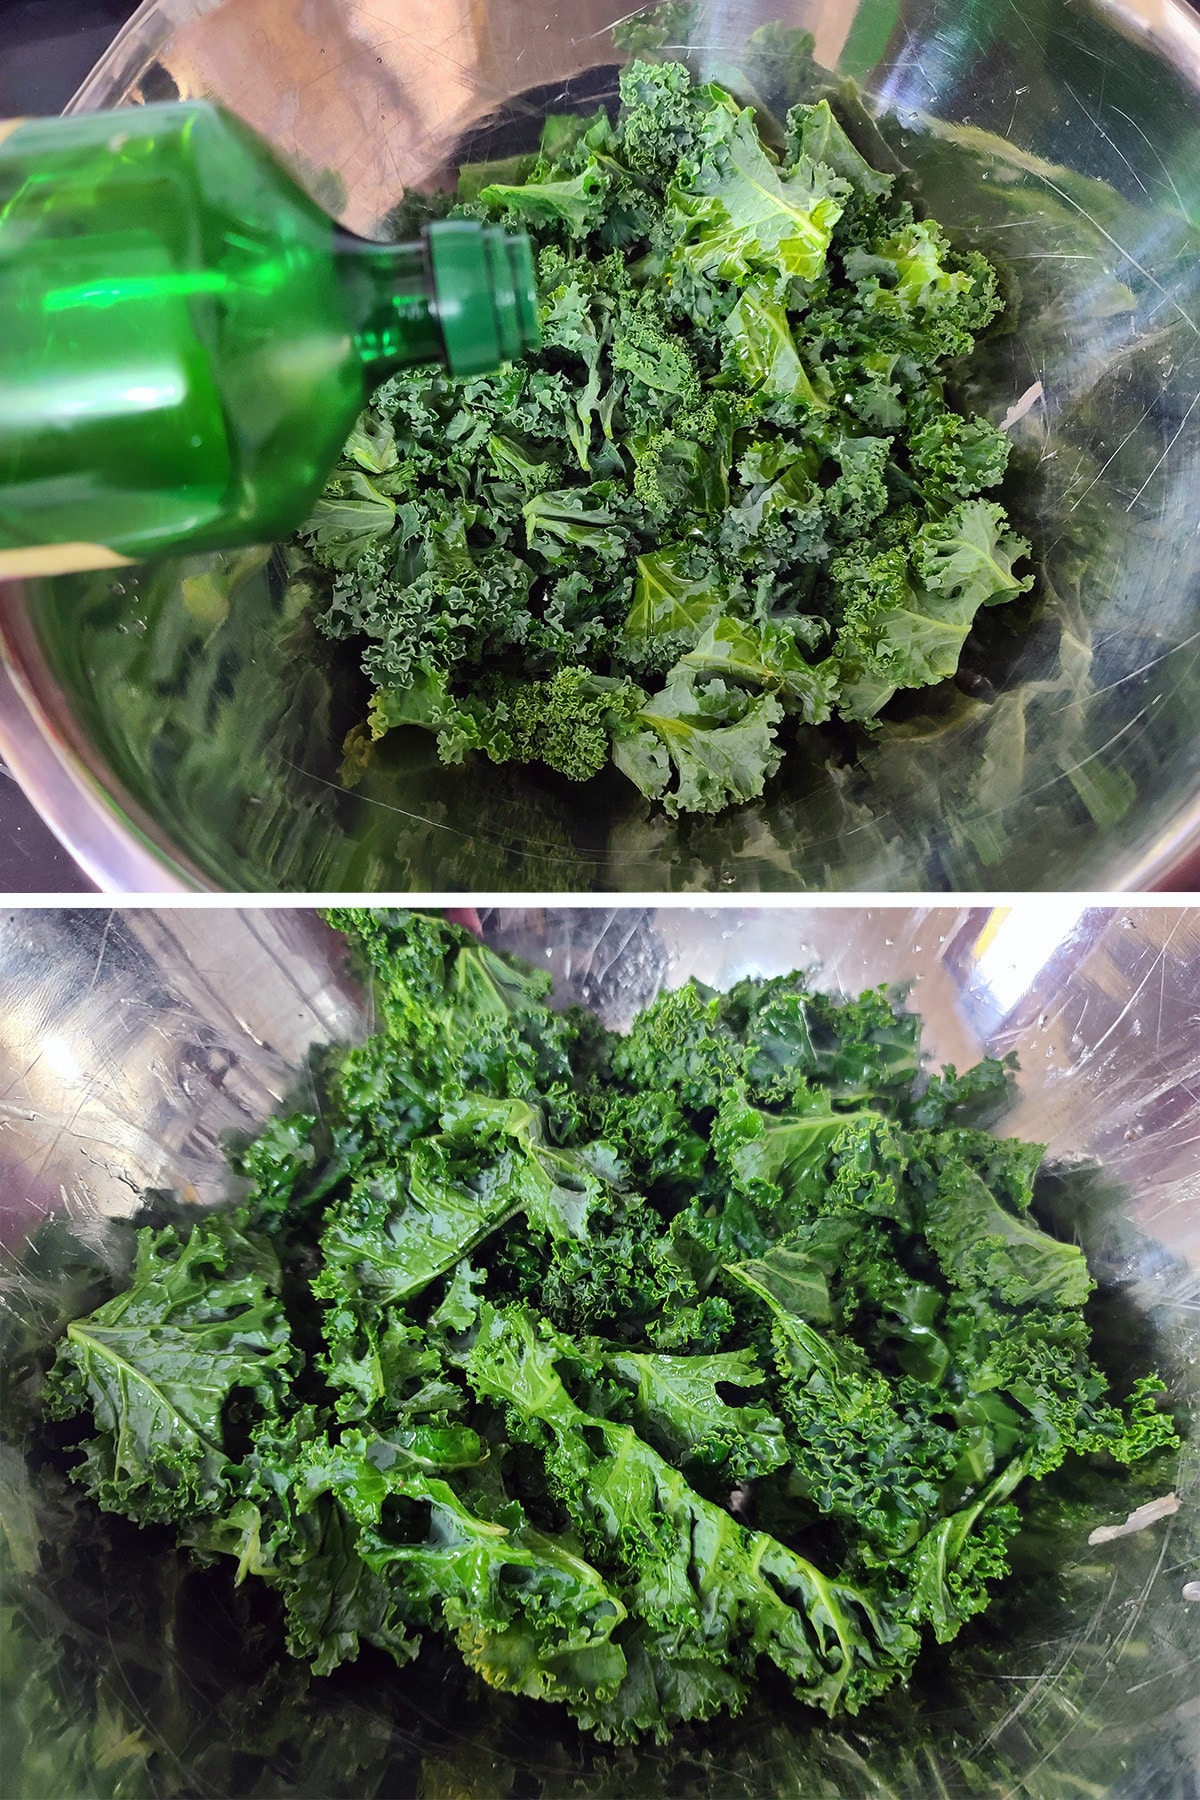 OIl being poured over kale in a large bowl.